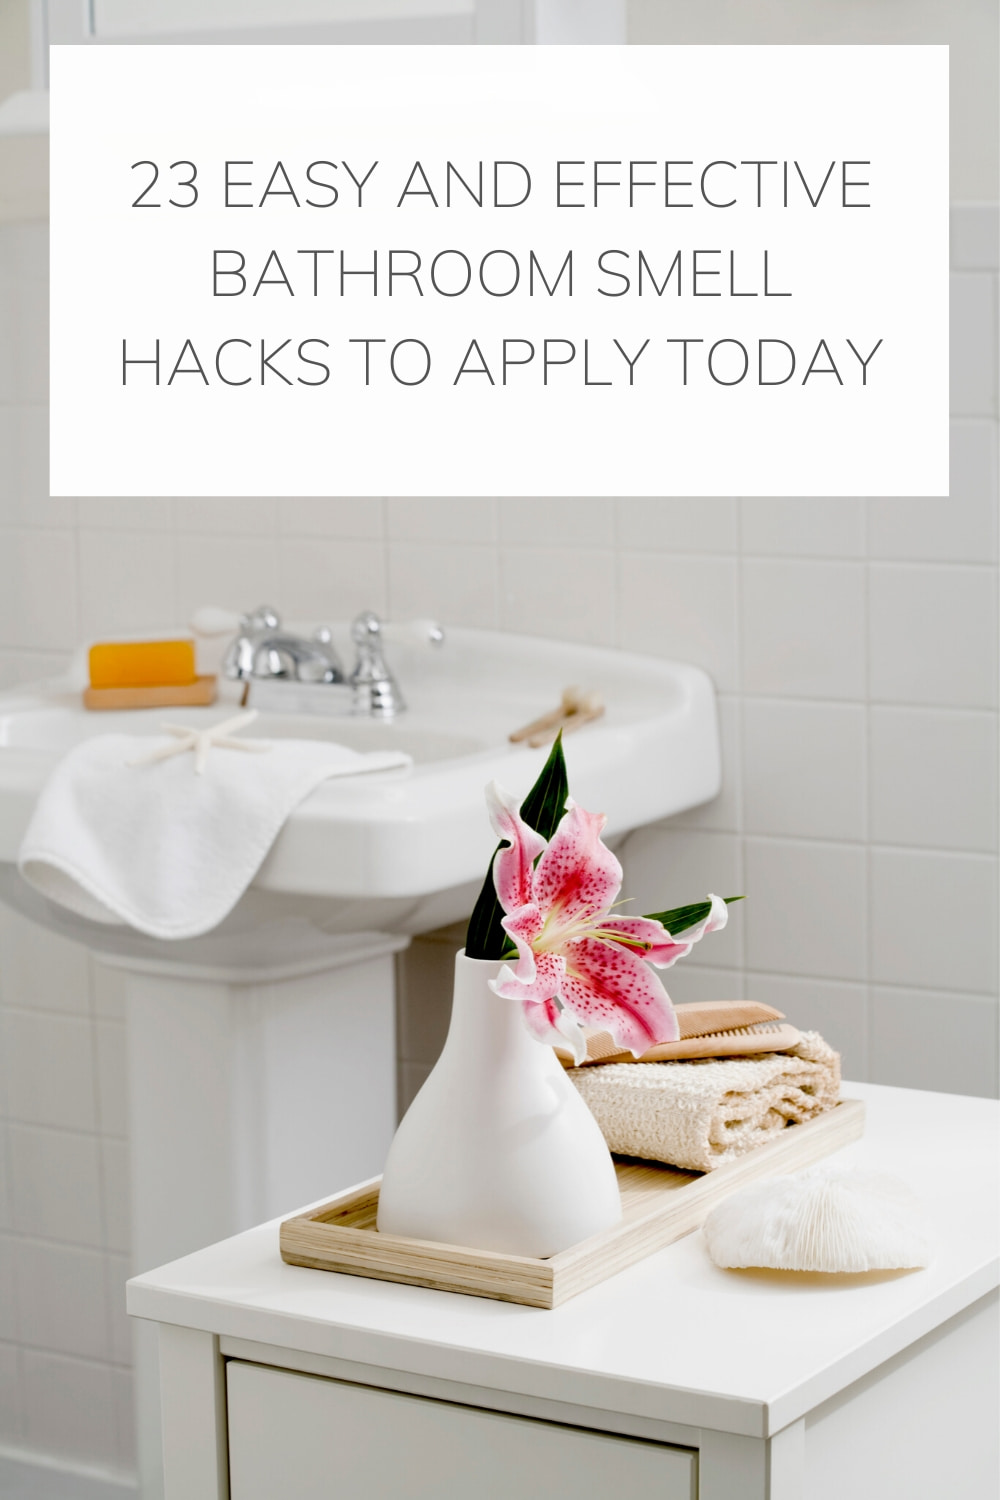 23 Easy and Effective Bathroom Smell Hacks to Apply Today